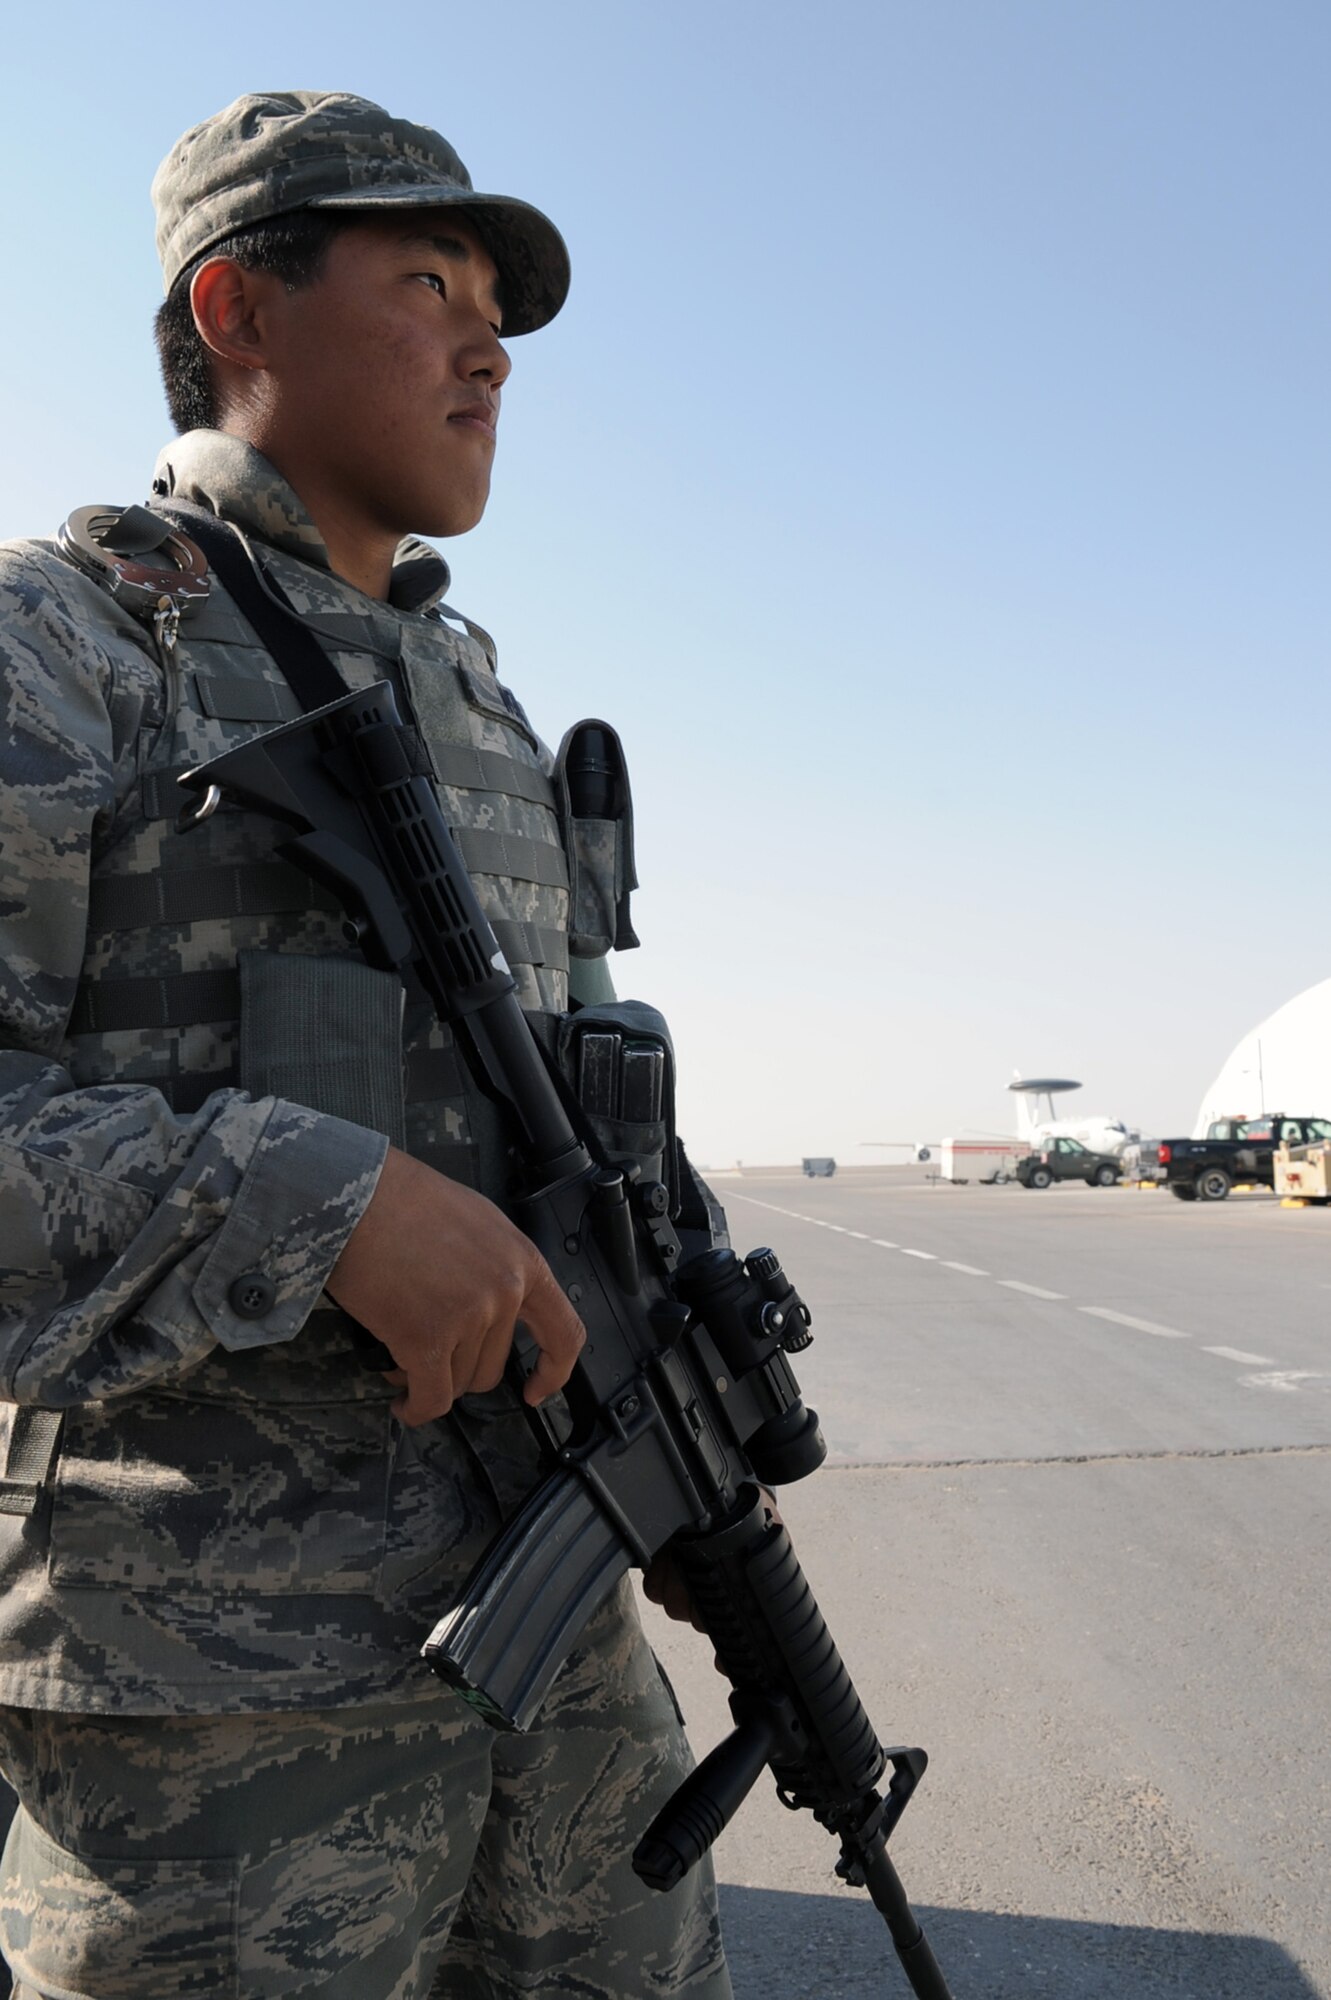 Airman 1st Class Brandon Wong, security forces journeyman with the 380th Expeditionary Security Forces Squadron at a non-disclosed base in Southwest Asia, watches over a checkpoint during operations near the flightline Jan. 22, 2010.  Airman Wong is deployed from the 47th Security Forces Squadron at Laughlin Air Force Base, Texas, and his hometown is Kapolei, Hawaii.  (U.S. Air Force Photo/Tech. Sgt. Scott T. Sturkol/Released)